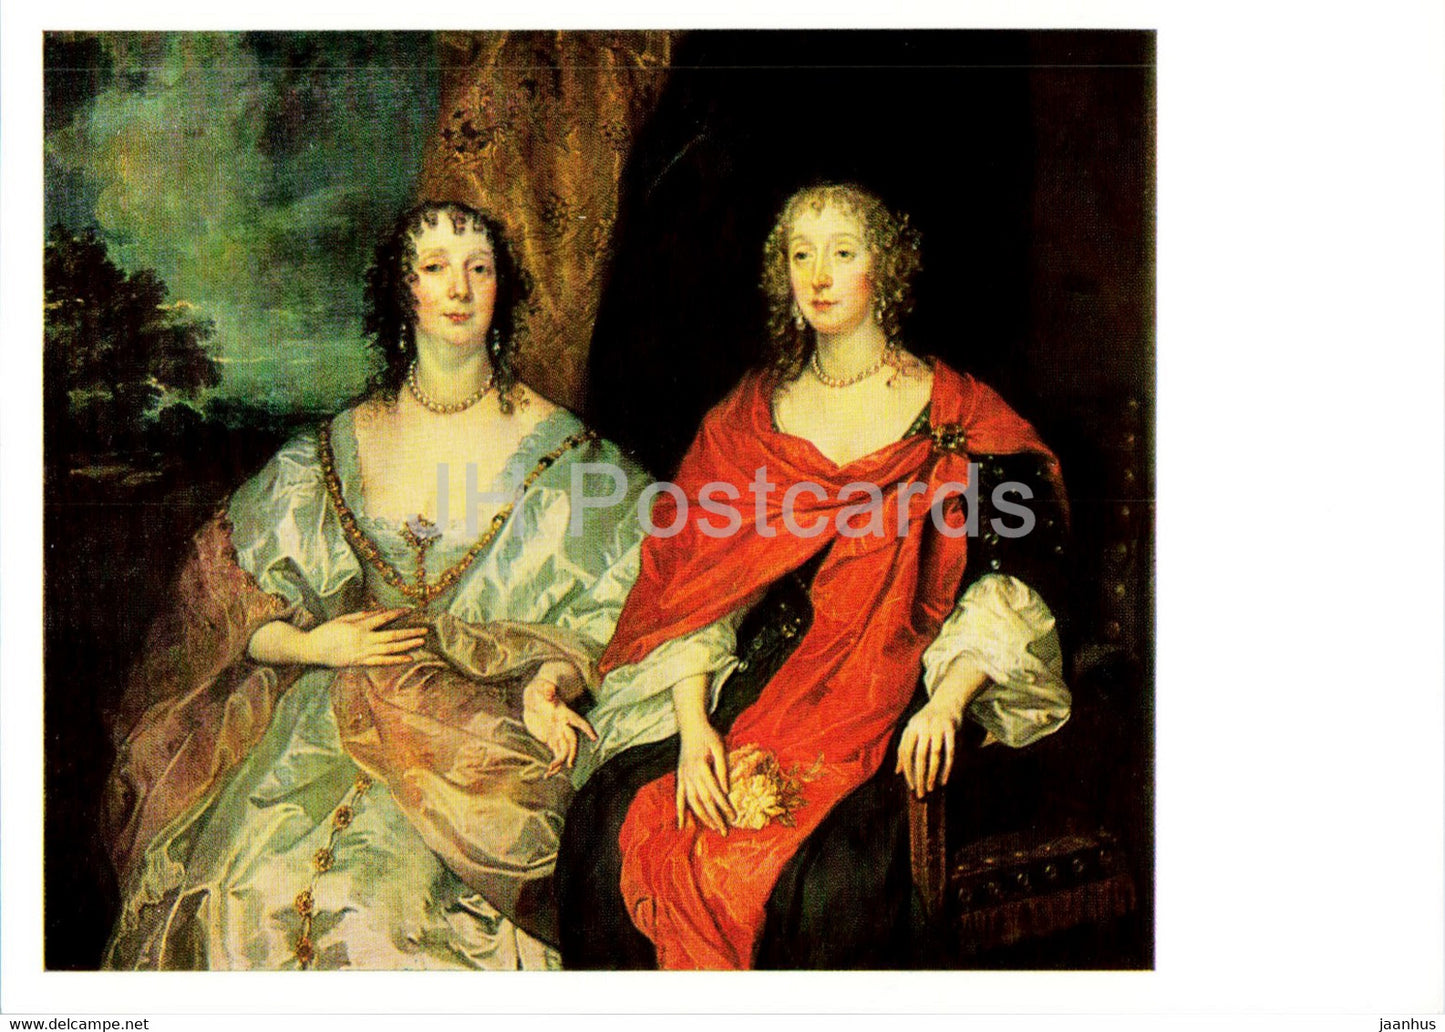 painting by Anthony van Dyck - Portrait of Anne Dalkeith the Countess - Flemish art - 1988 - Russia USSR - unused - JH Postcards